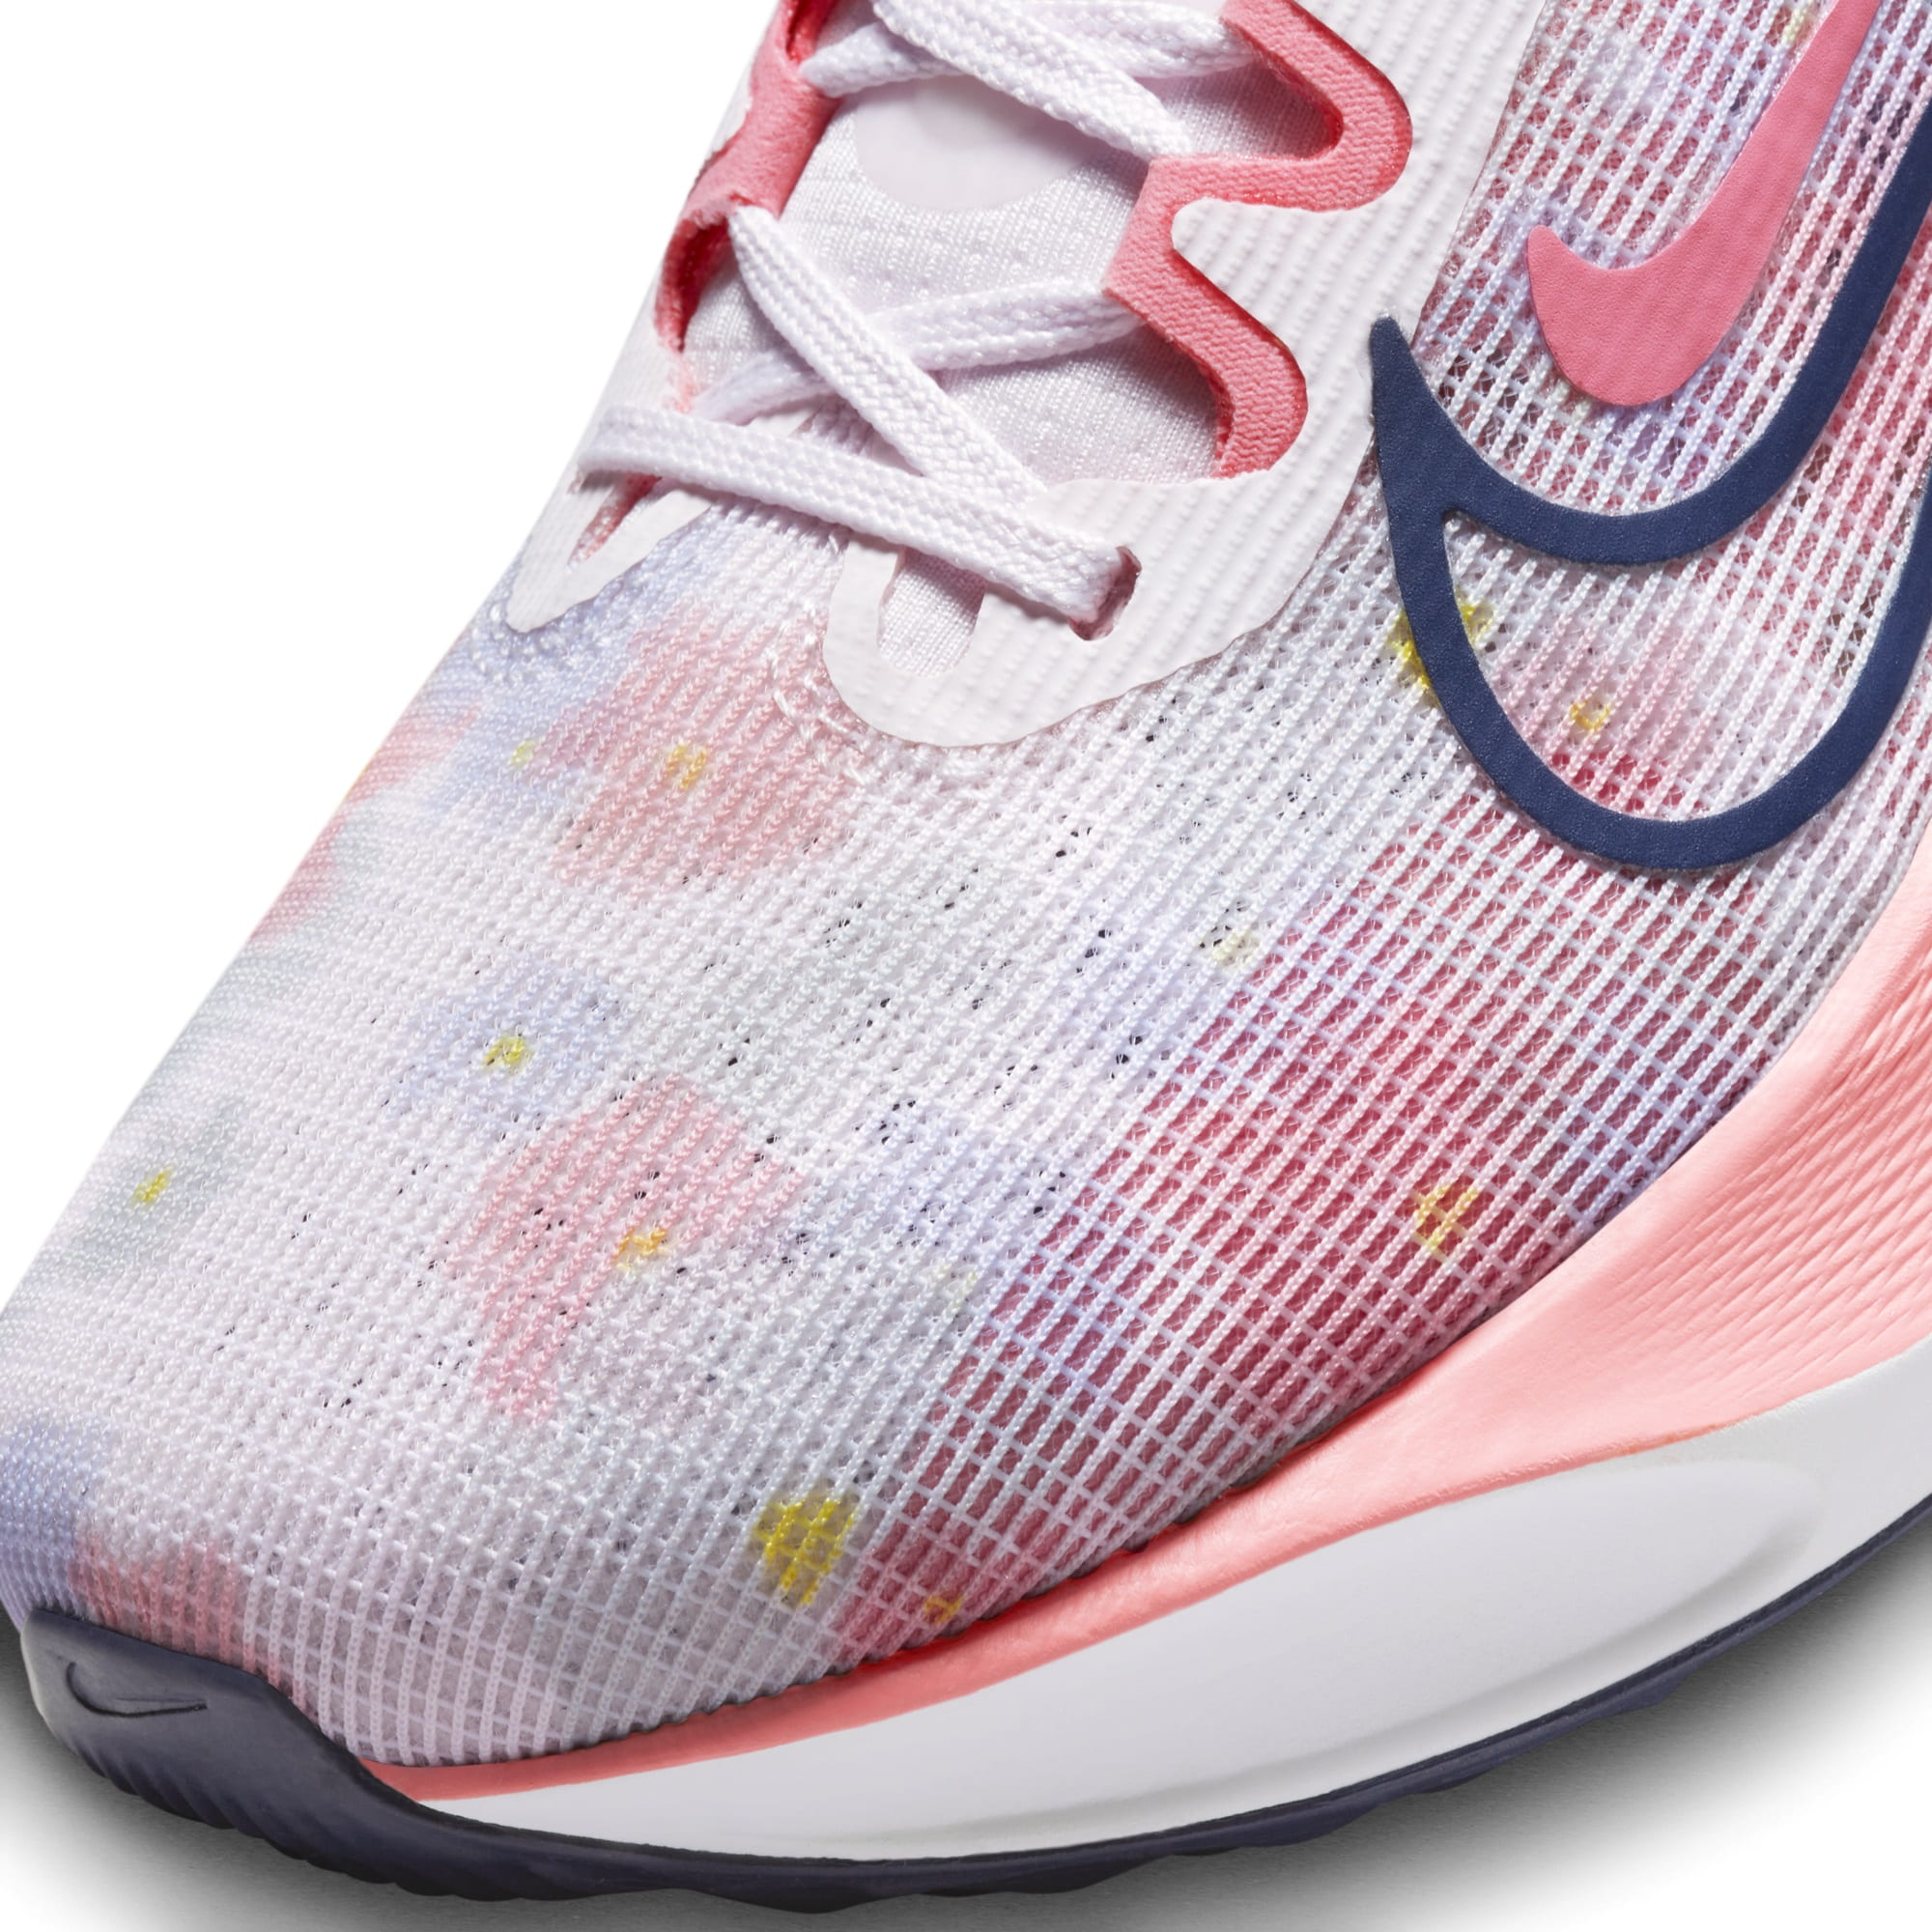 GIÀY NIKE NỮ ZOOM FLY 5 PREMIUM WOMEN ROAD RUNNING SHOES PEARL PINK DV7894-600 8